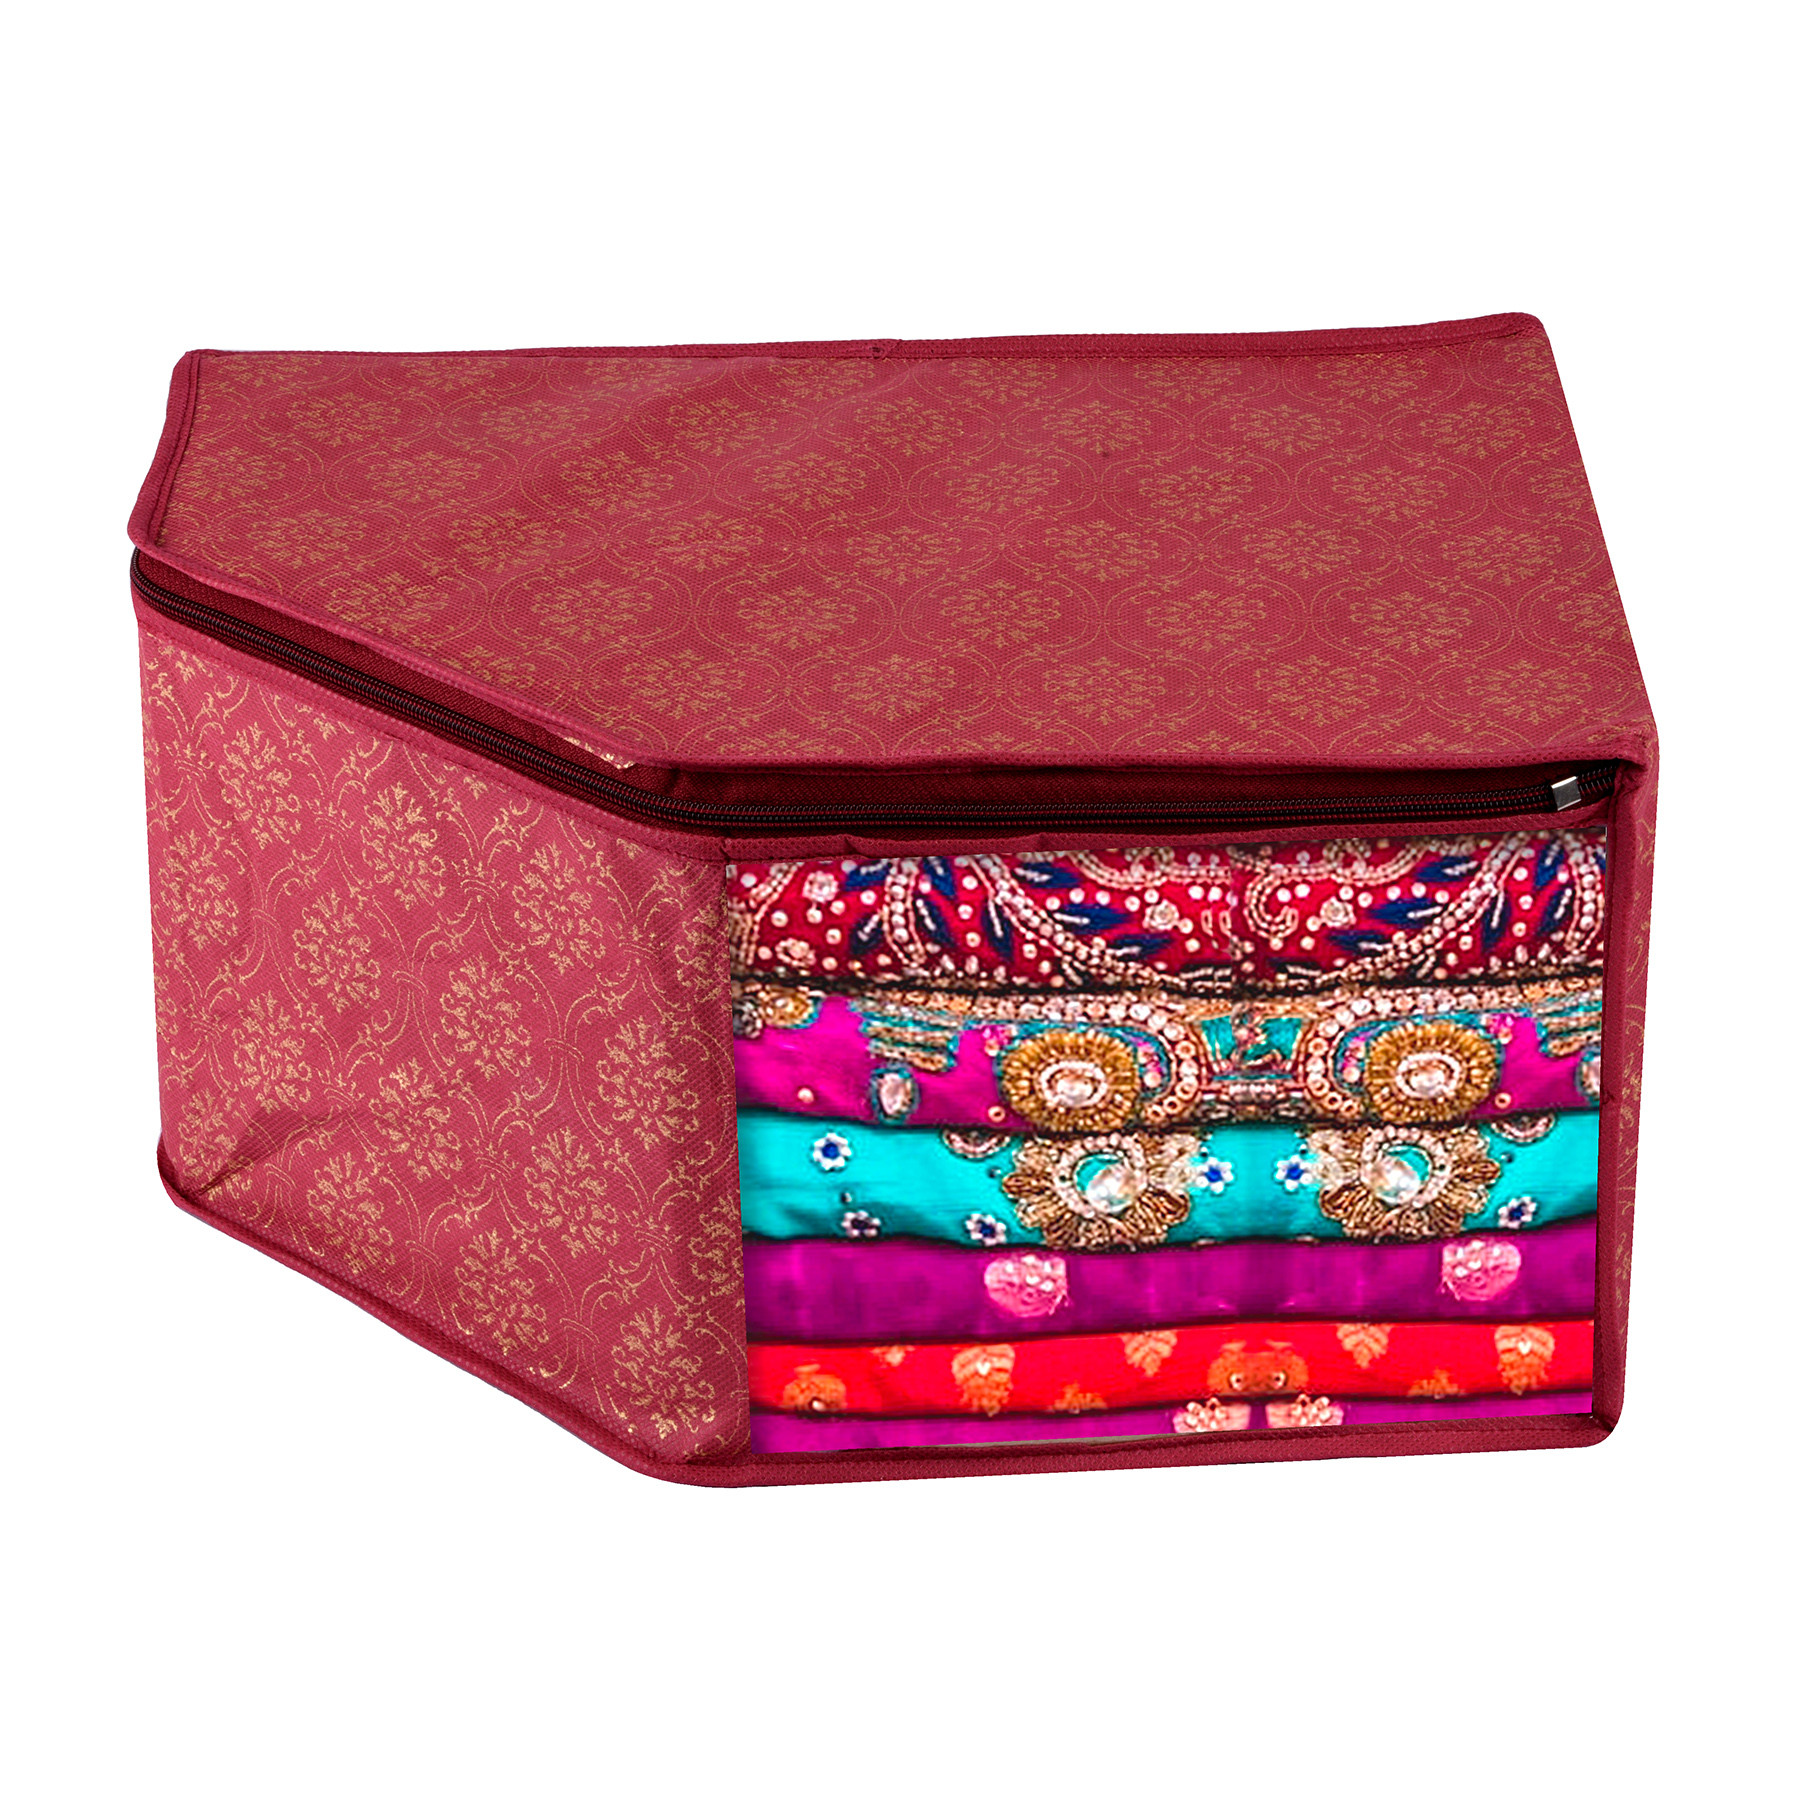 Kuber Industries Blouse Cover | Clothes Storage Bag | Zipper Closure Wardrobe Organizers | Clothes Organizer with Transparent Window | Golden-Printed Clothes Bag |Maroon